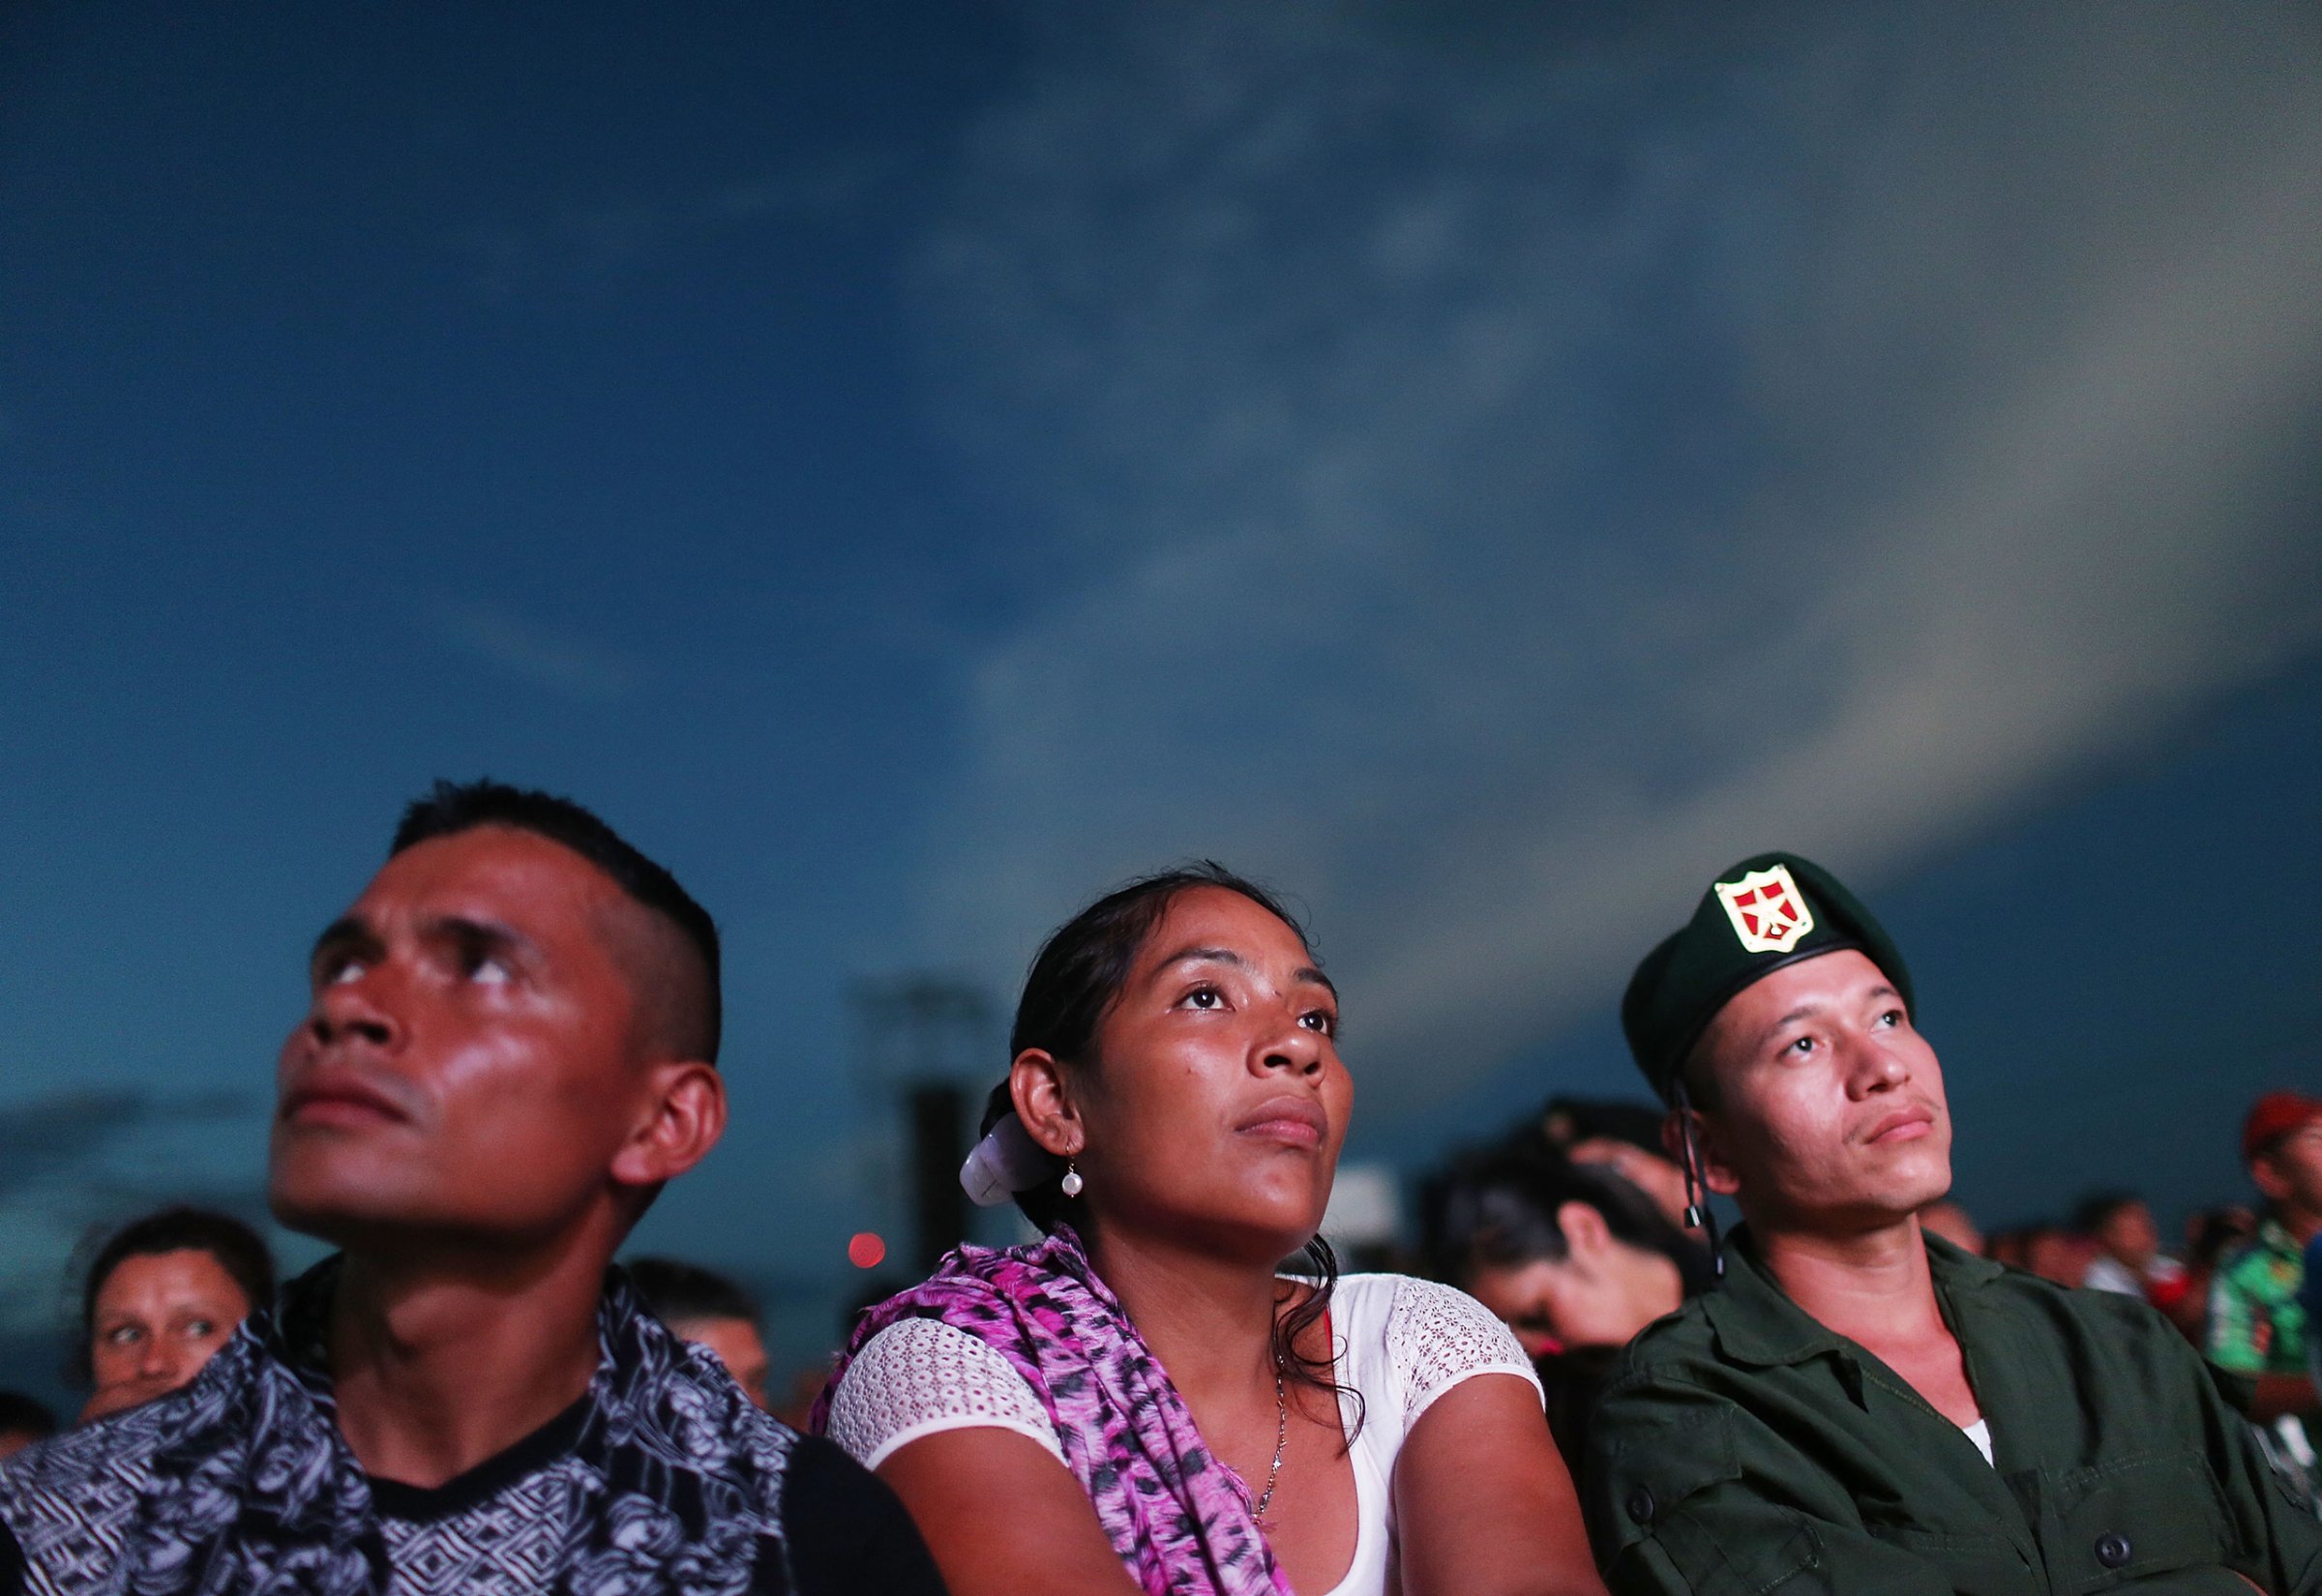 Revolutionary Armed Forces of Colombia (FARC) rebels watch a live broadcast of the peace agreement ceremony while at a FARC encampment in the remote Yari plains where the peace accord was ratified by the FARC on September 26, 2016 in El Diamante, Colombia. The peace agreement attempts to end the 52-year-old guerrilla war between the FARC and the state, the longest-running armed conflict in the Americas which has left 220,000 dead. The final agreement will be put to vote by the public in a referendum on October 2. The plan calls for a disarmament and re-integration of most of the estimated 7,000 FARC fighters. (Photo by Mario Tama/Getty Images)